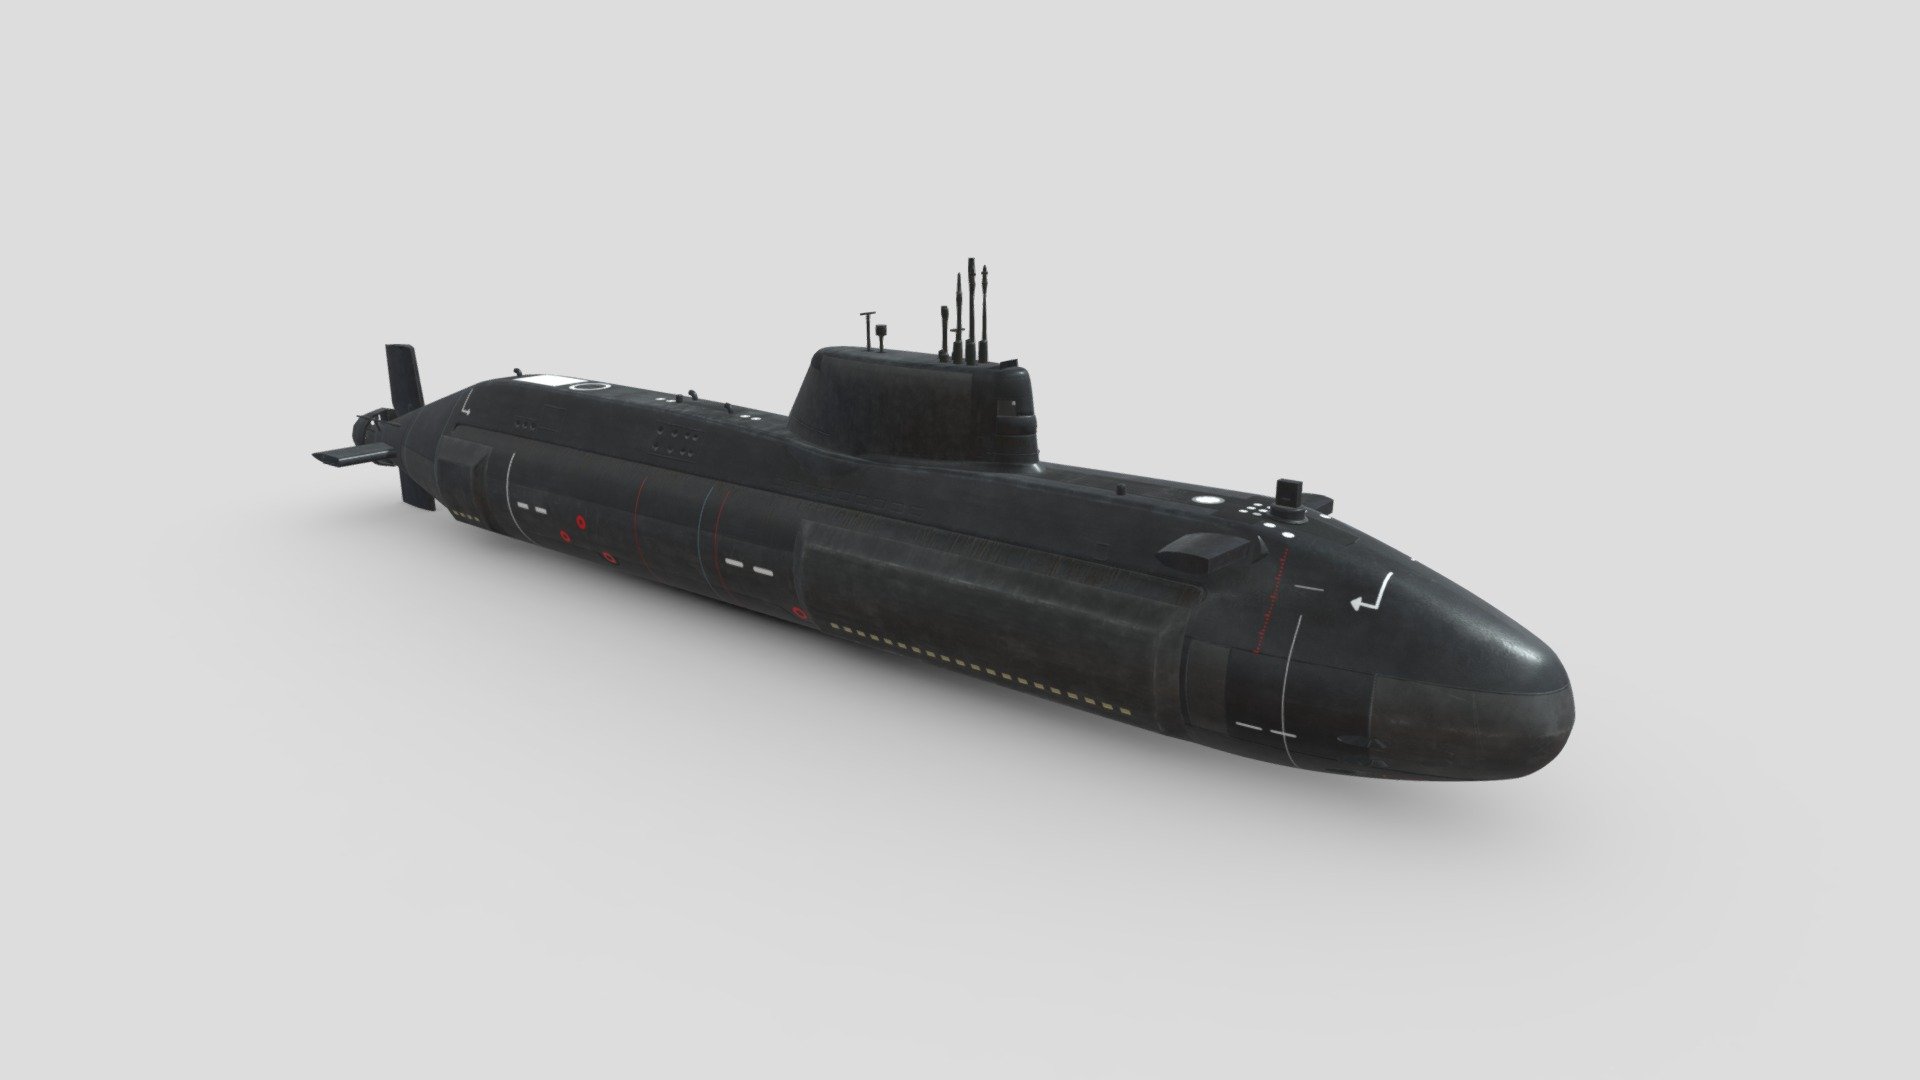 This is a 3d model of HMS Artful S121 Submarine :
 Model can be smoothed by modifying turbosmooth, meshsmooth,&hellip; in 3d softwares.
 Texture: 4096x4096 (jpg)
 Texture: 4096x4096 (png) - High Quality
 Formats: .fbx, .max

Let’s enjoy it together! - HMS Artful S121 Submarine - 3D model by Rutas (@Suandoa) 3d model